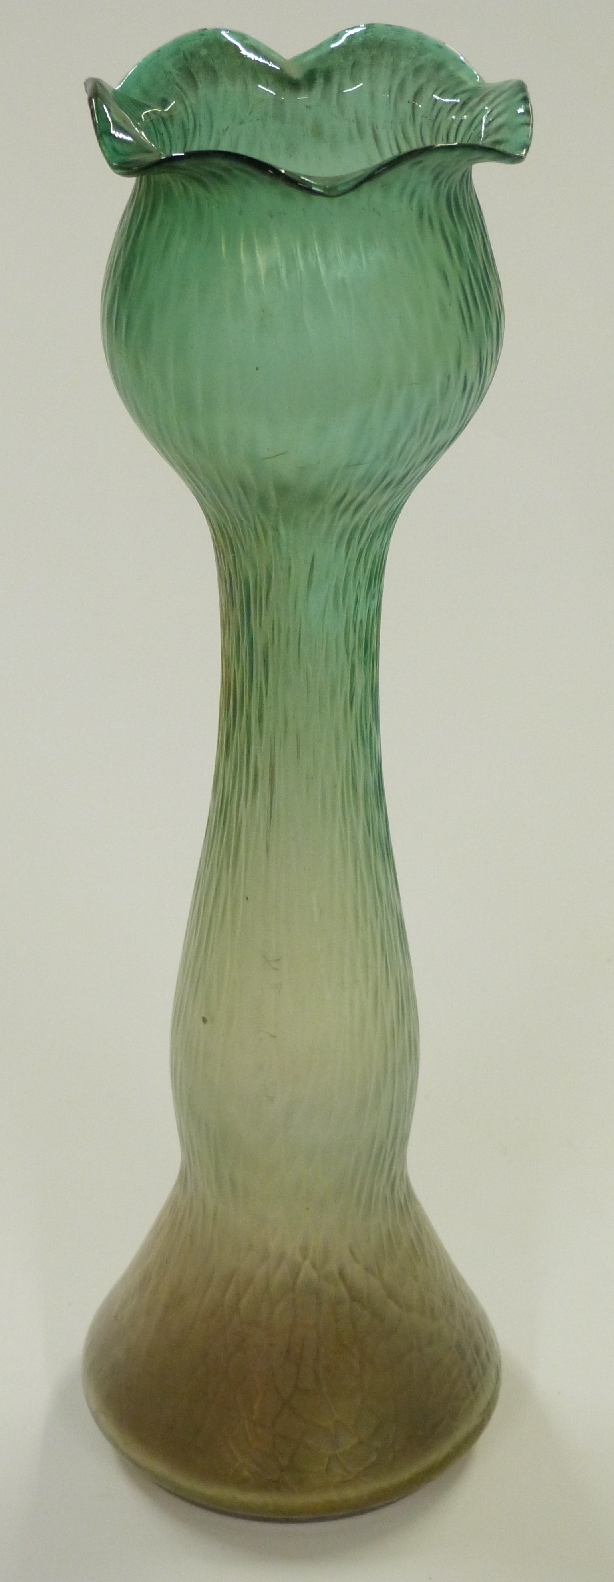 Loetz Papillon type iridescent glass double gourd vase with flared rim, 34cm tall. - Image 2 of 2